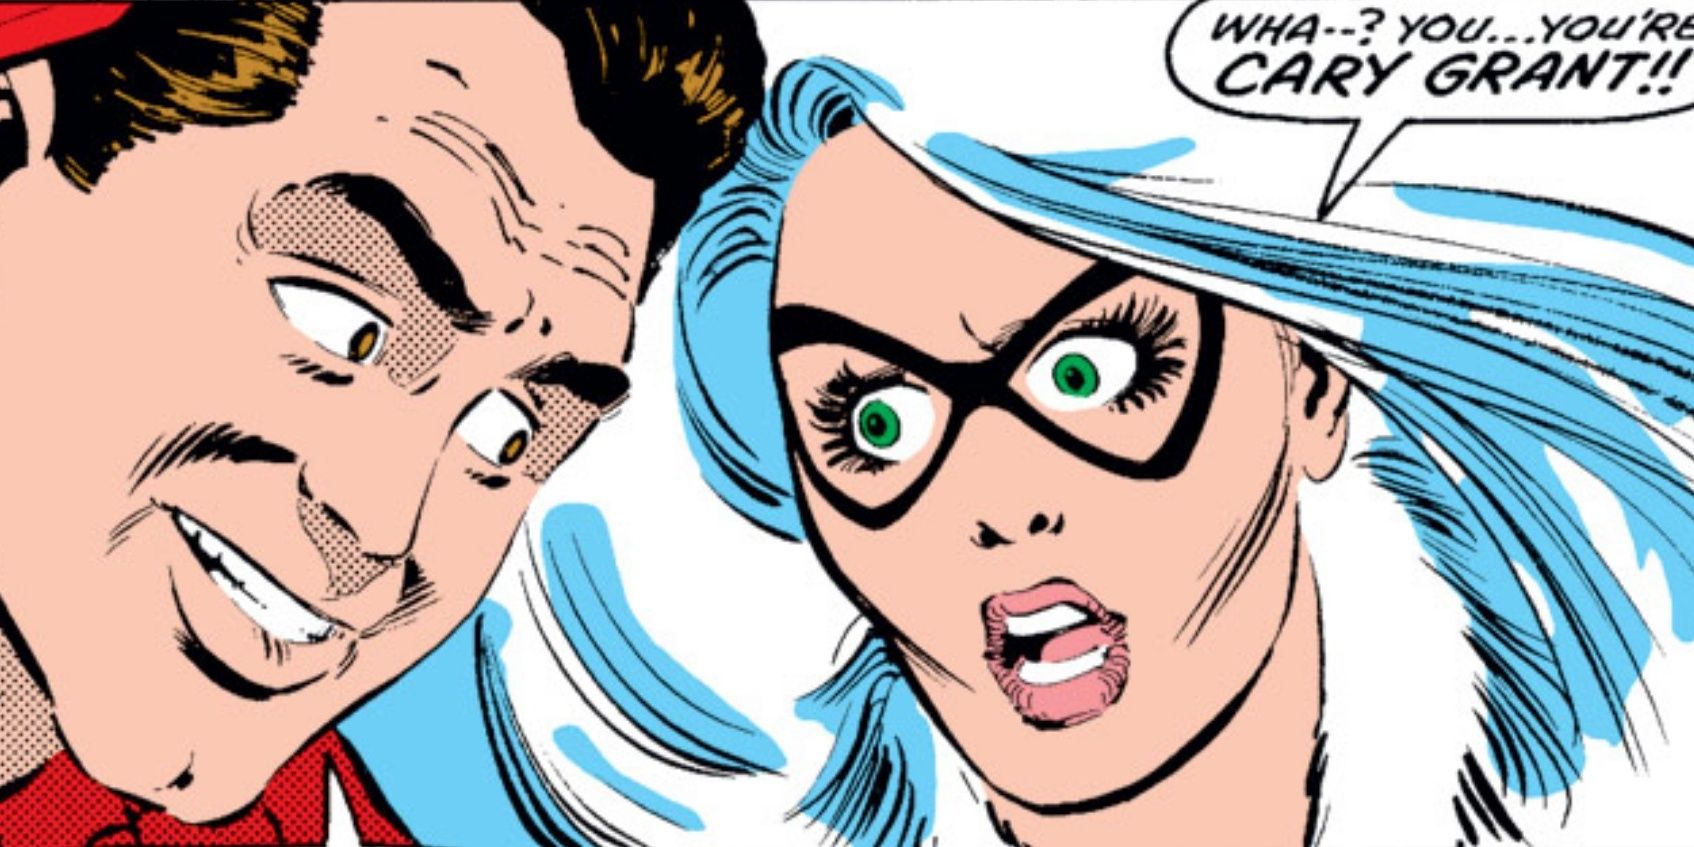 Black Cat fantasizes that Spider-Man unmasks and is Cary Grant